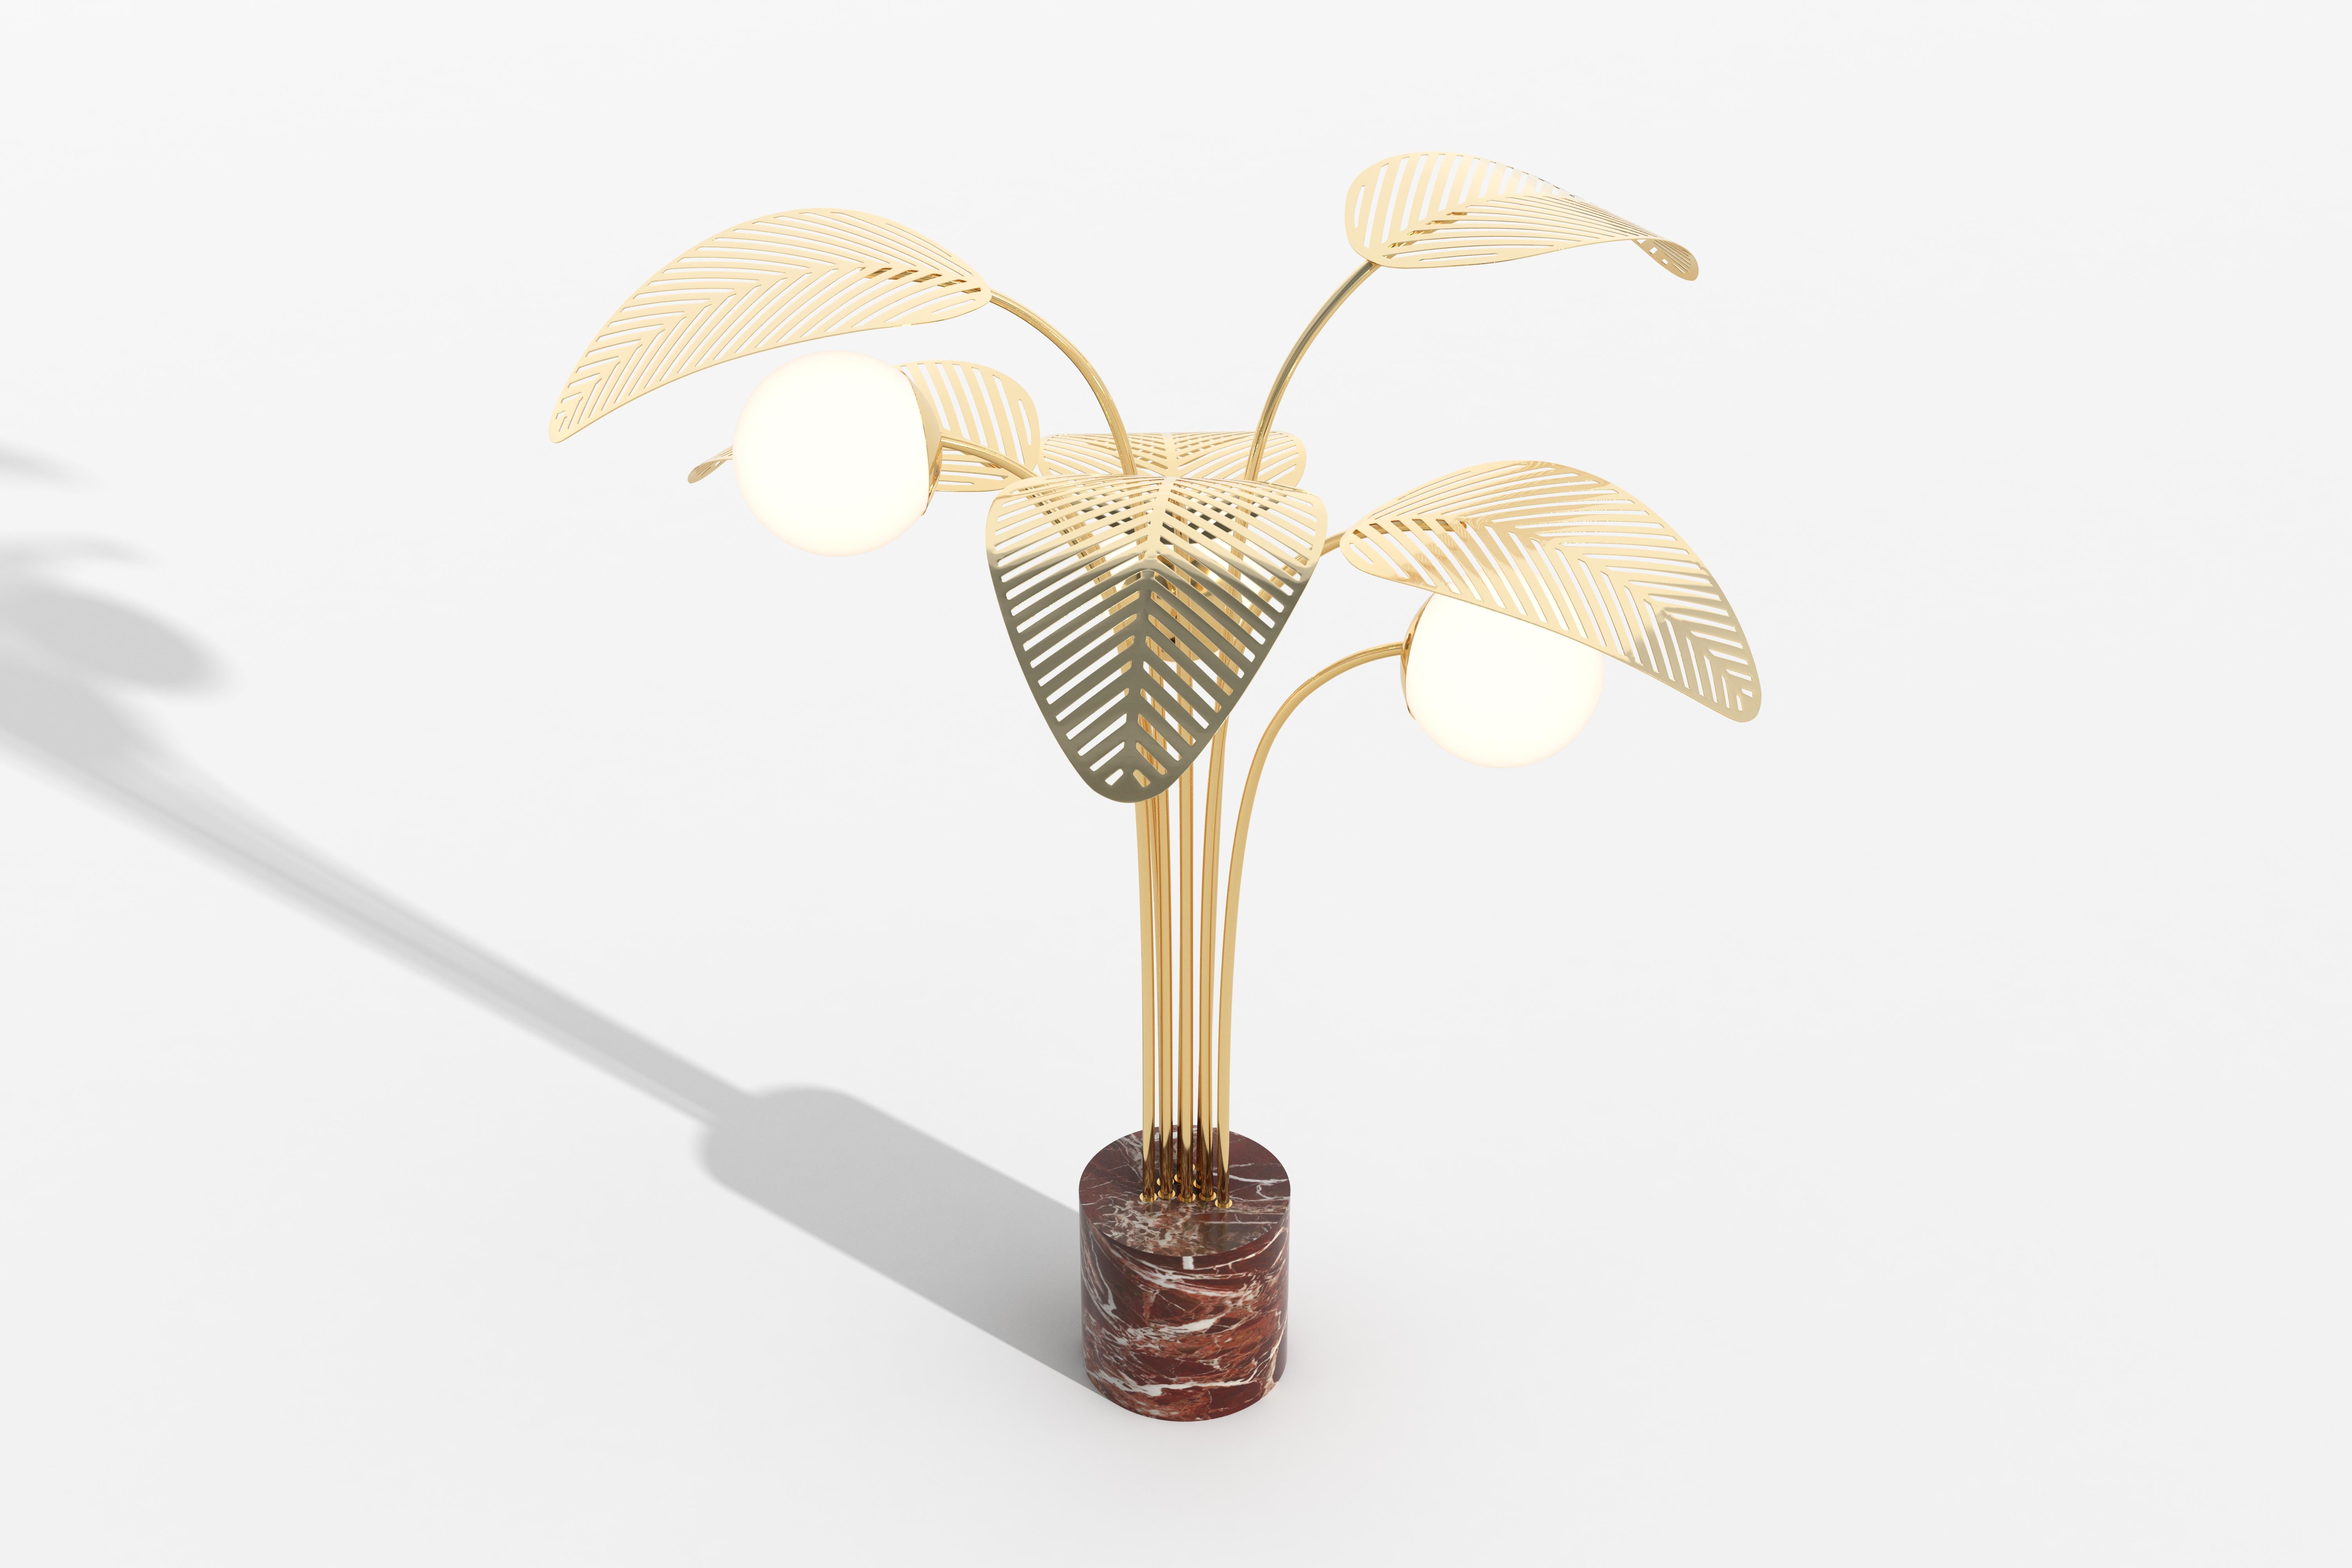 Floor lamp with Rosso di Francia red marble base, and six giant palm leaves, die-cut in high-gloss gold metal.
Frosted lamp shade and dimmable light.

Designed by Parisian-Italian artist Marc Ange, who’s creations are always balanced between real